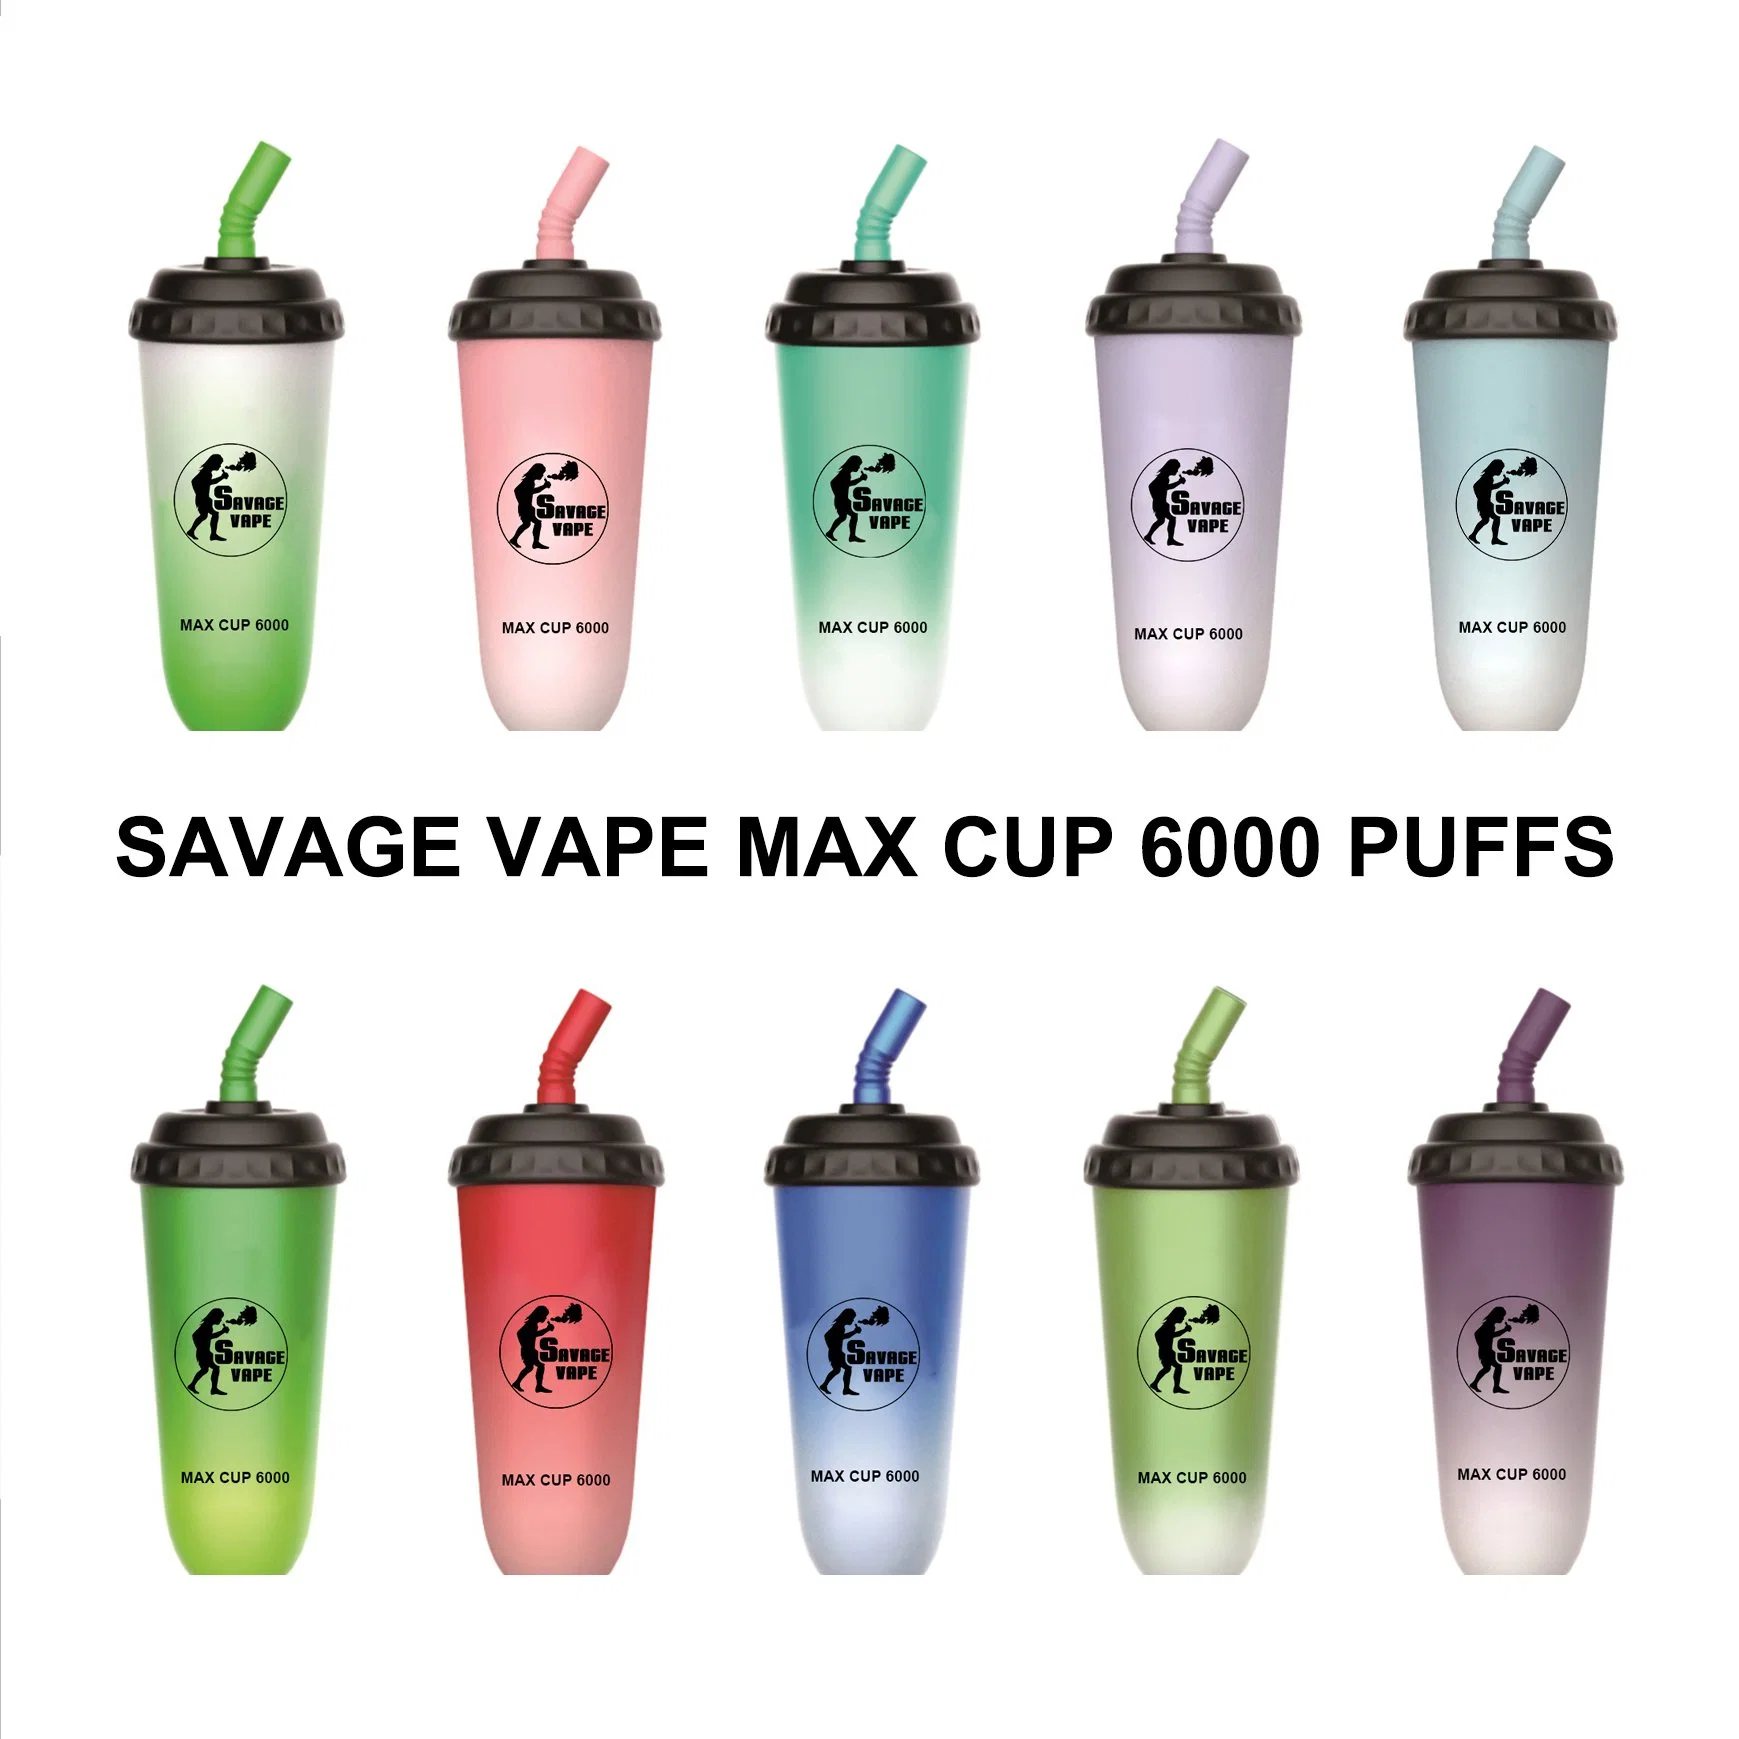 Original Savage Vape Max Cup 6000 Puffs Disposable/Chargeable Vapes Puff 7K E Cigarette Puff 8000 Prefilled Carts Zooy Apex 5000 Hits Rechargeable Battery 5% Randm Tornad